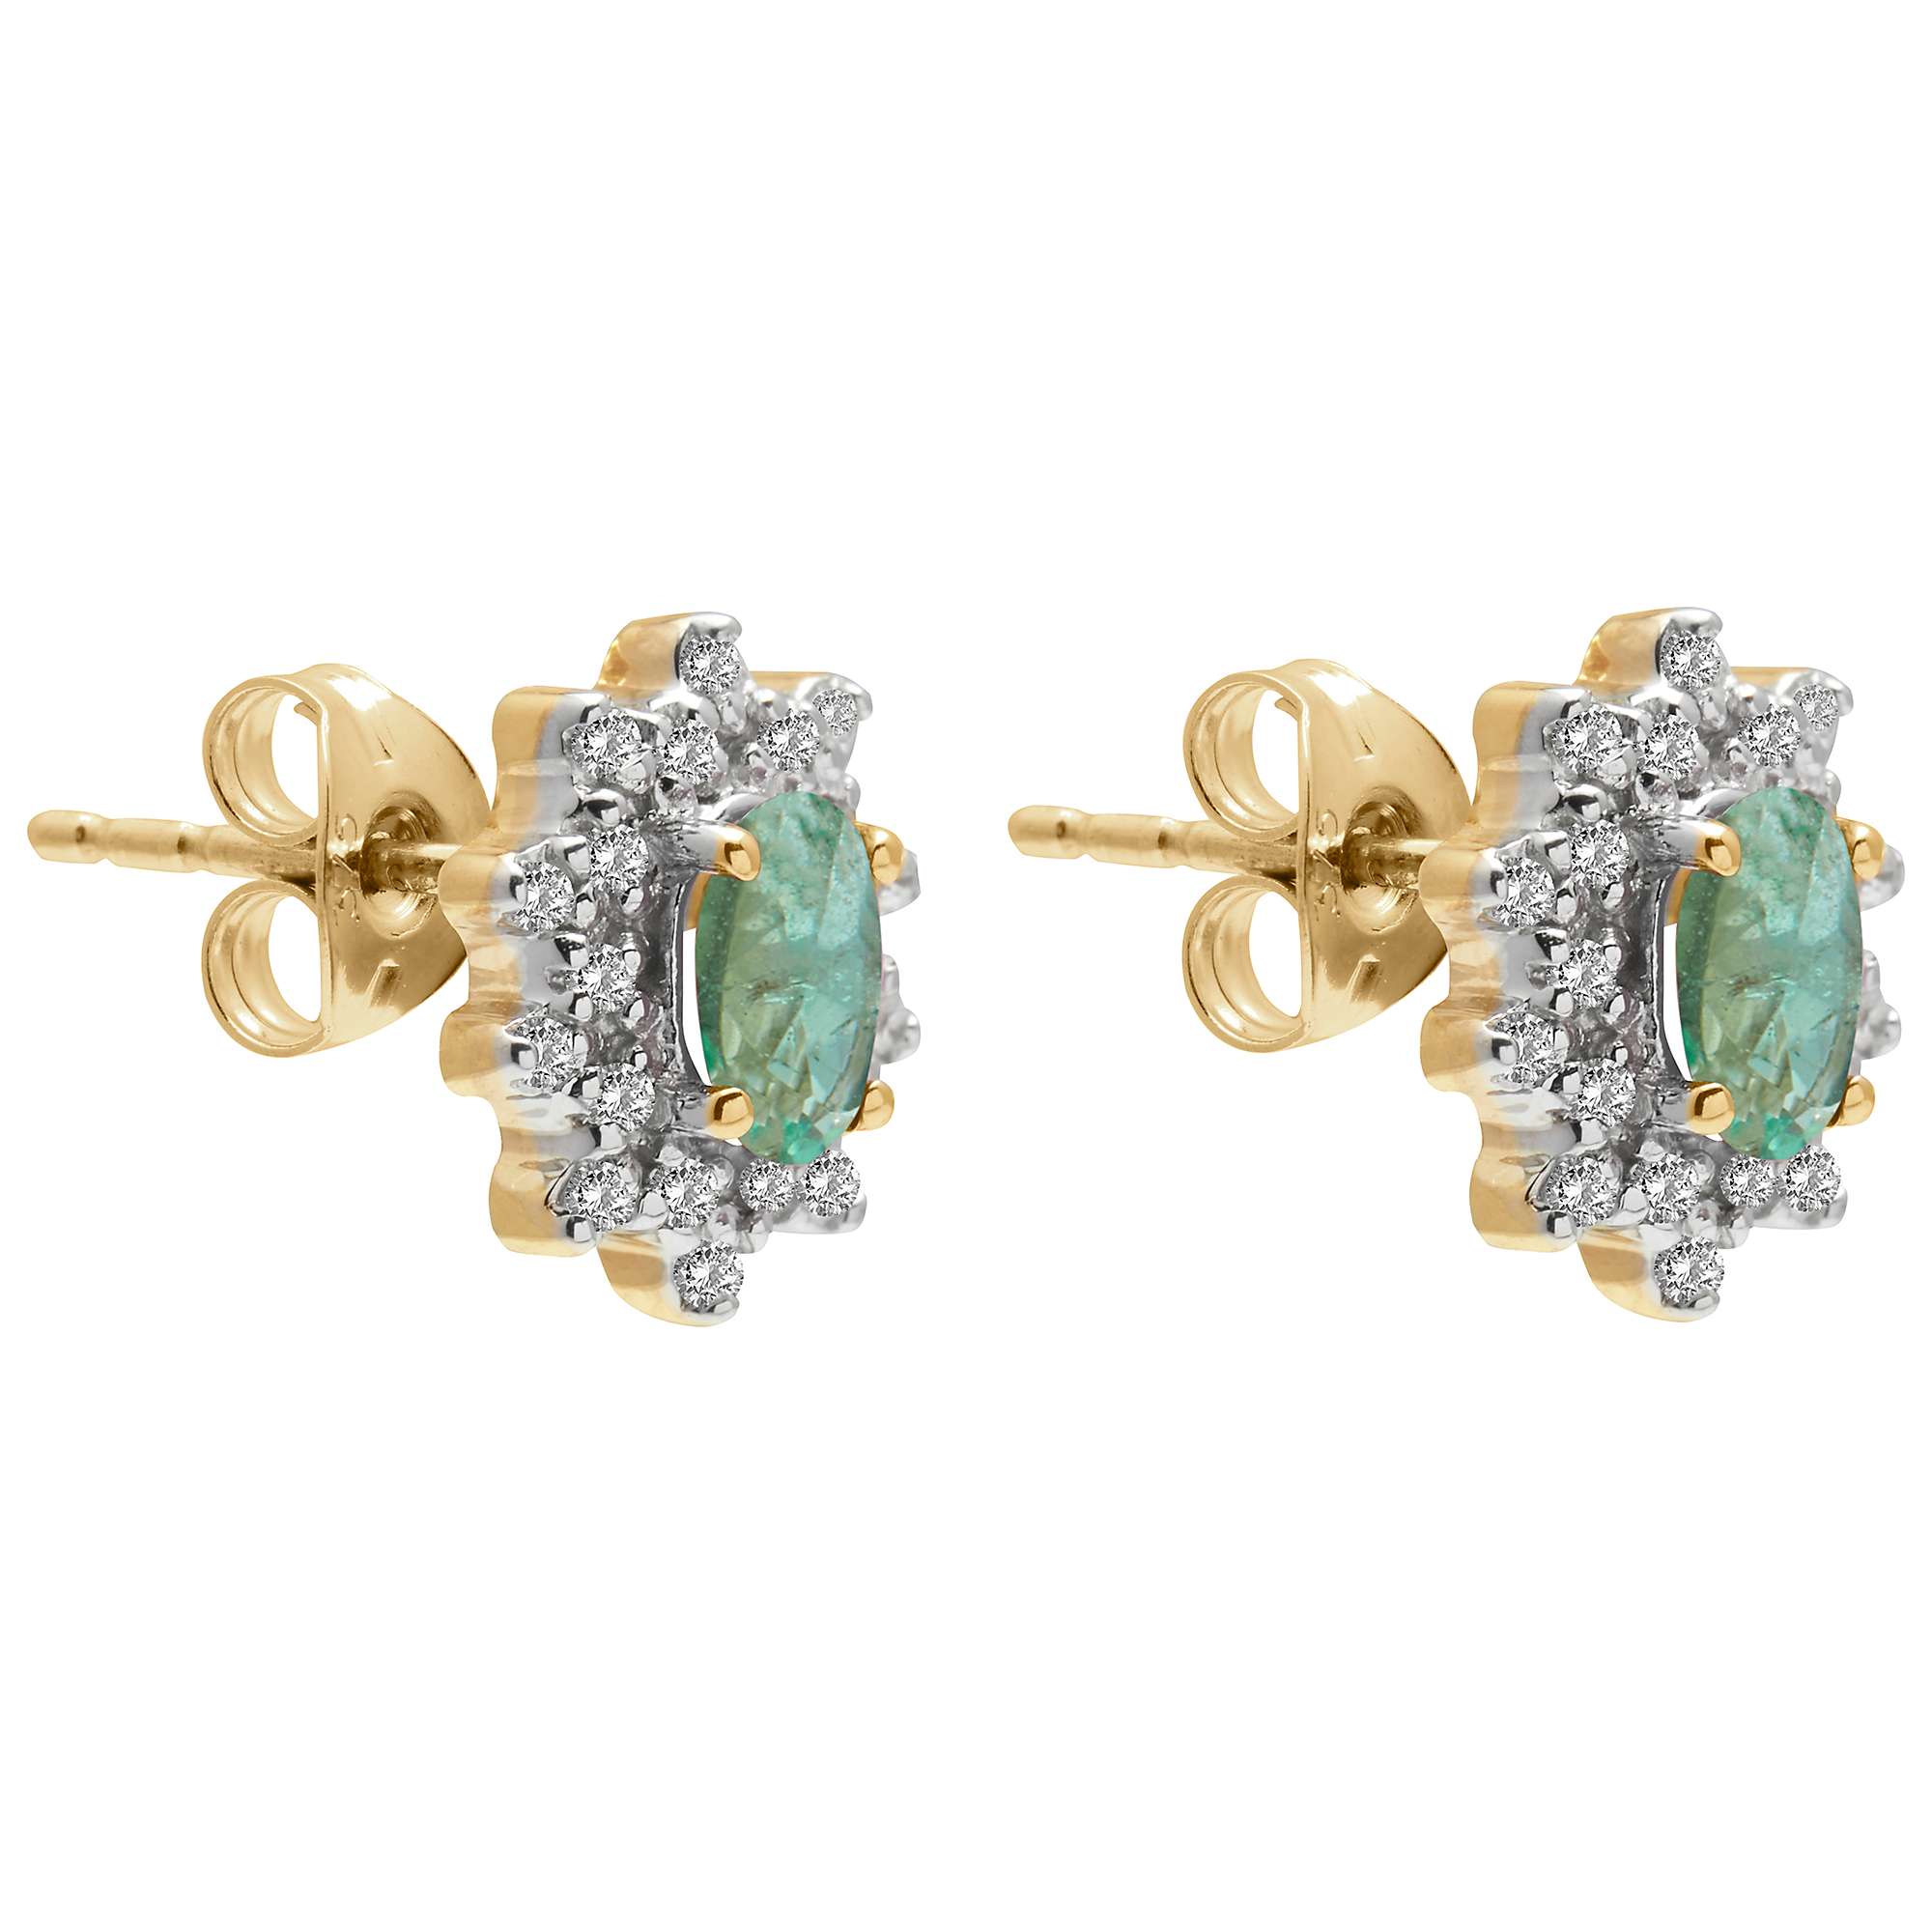 Buy A B Davis 9ct Gold Oval Precious Stone and Cluster Diamond Stud Earrings Online at johnlewis.com